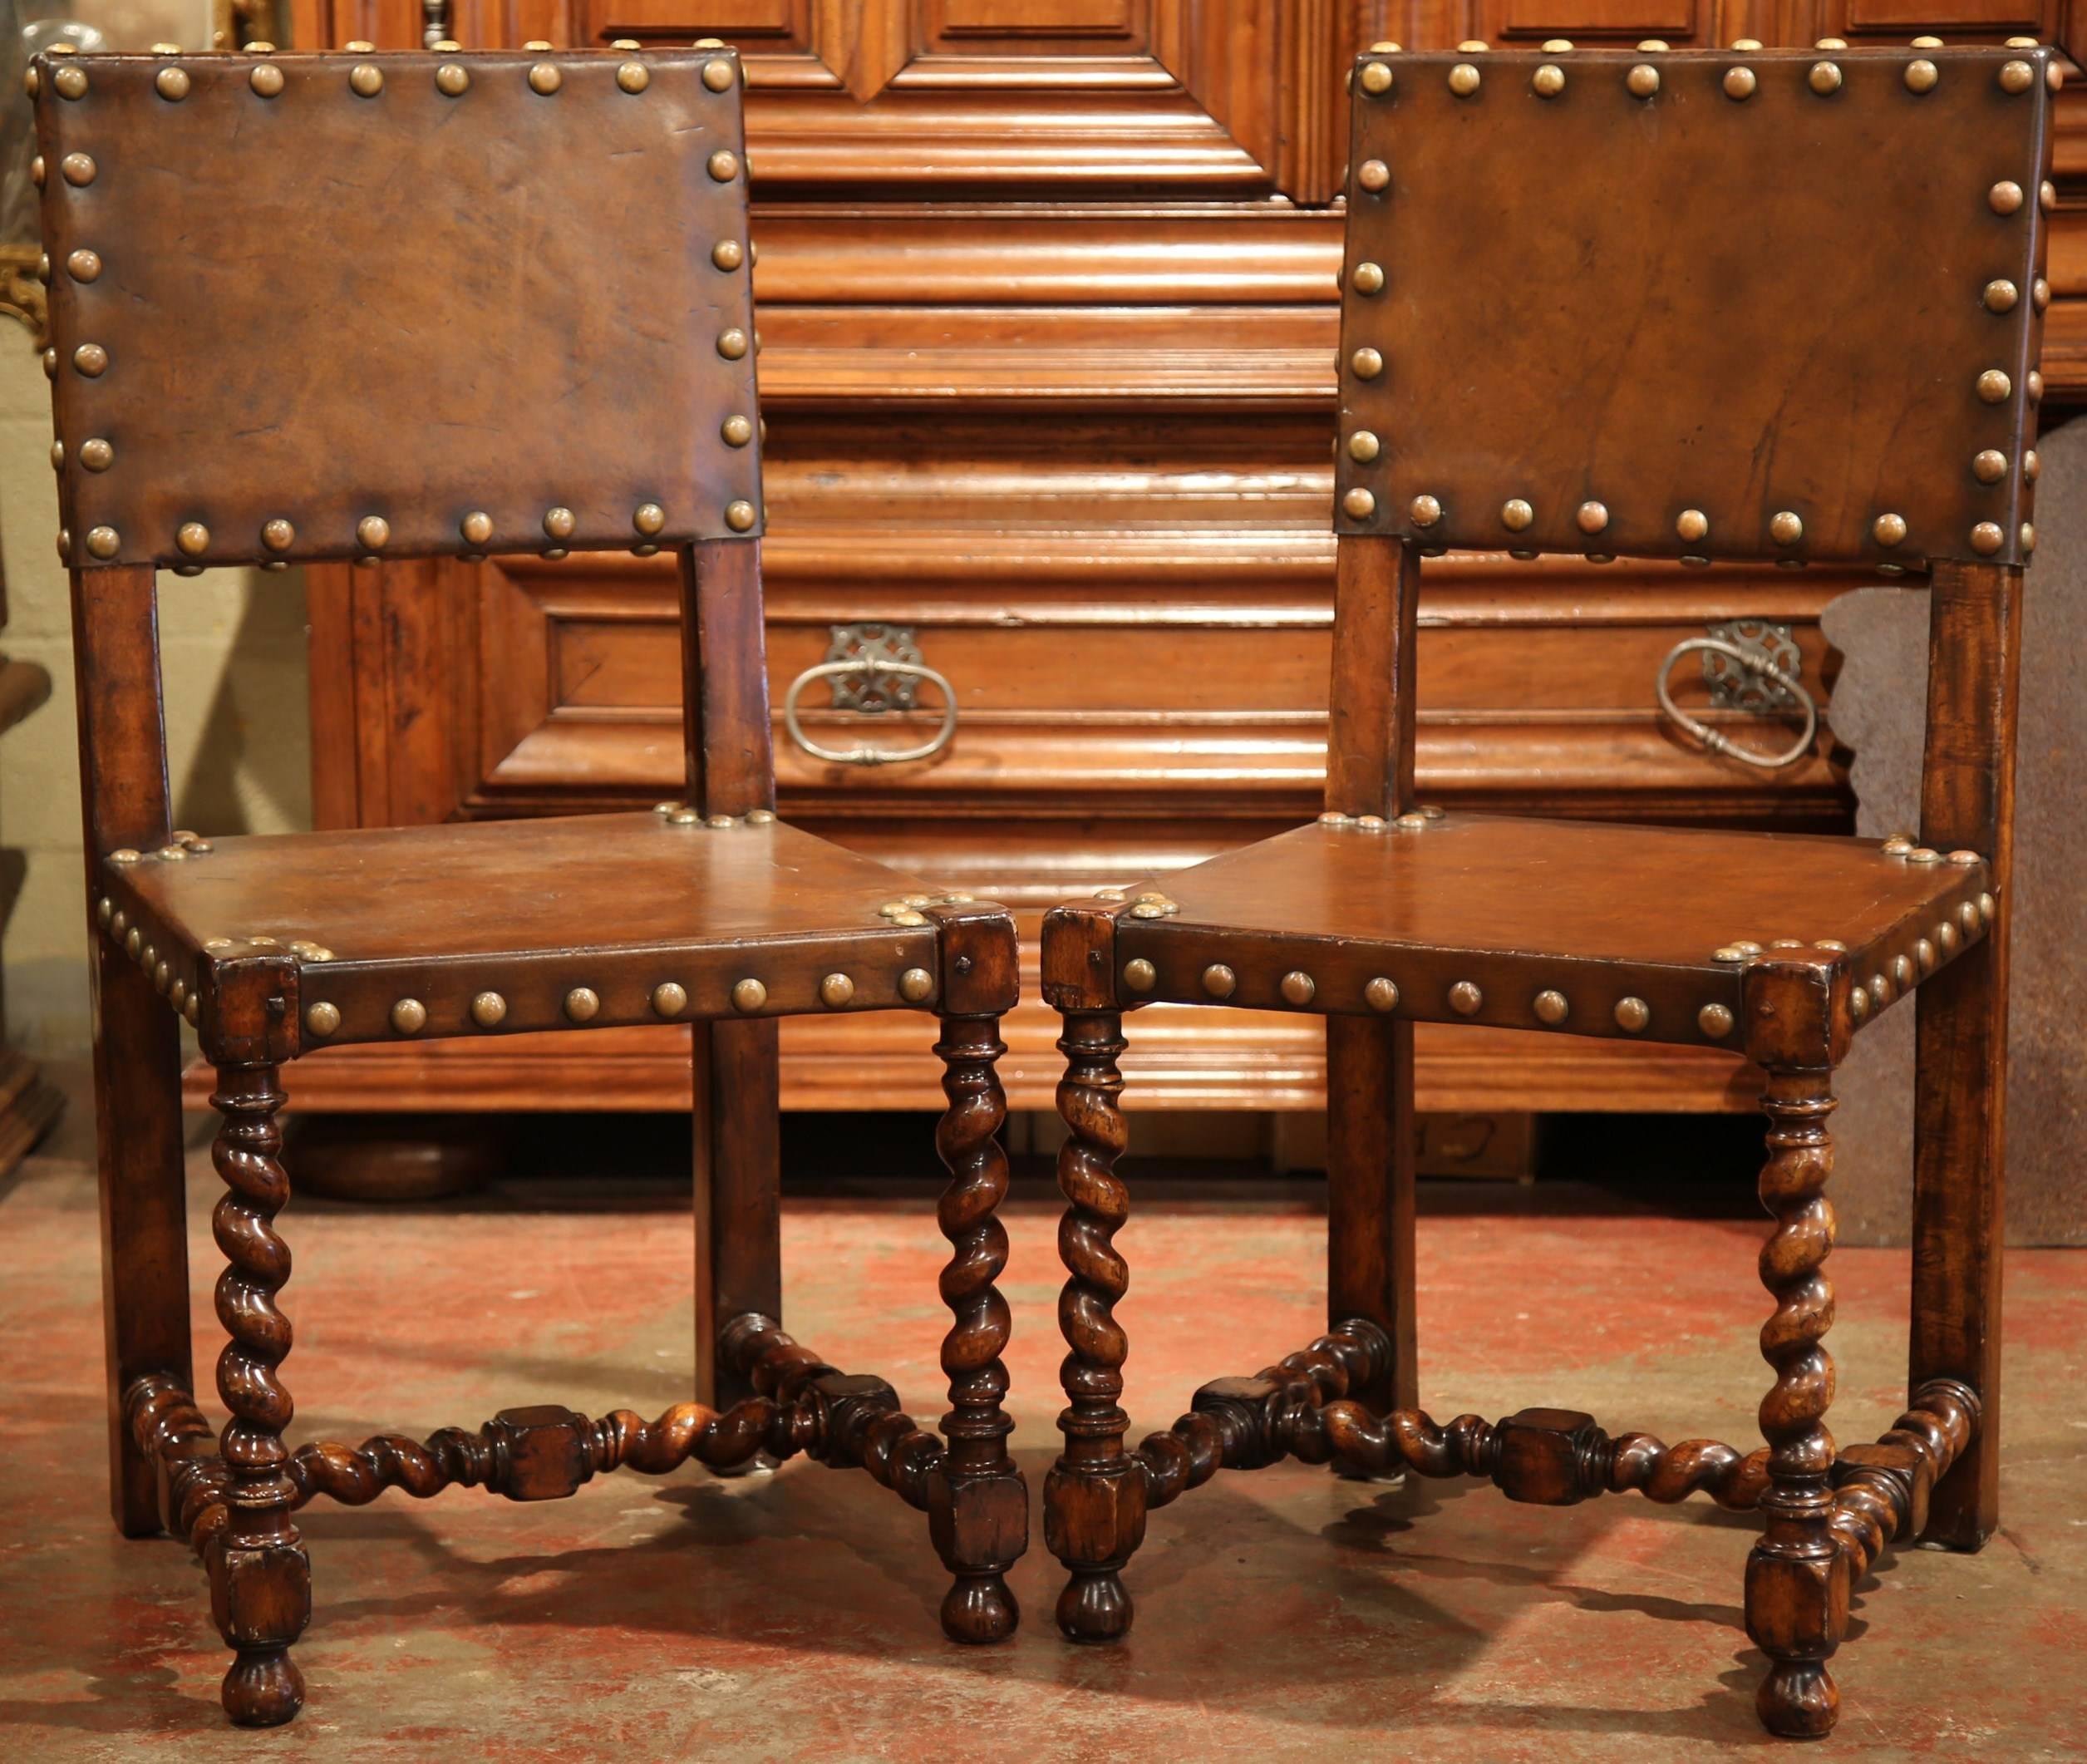 Incorporate extra seating into a study or library with this beautiful pair of antique side chairs from Spain, circa 1900. The chairs feature their original leather, which is embellished with decorative nail head detail. Underneath, the chairs have